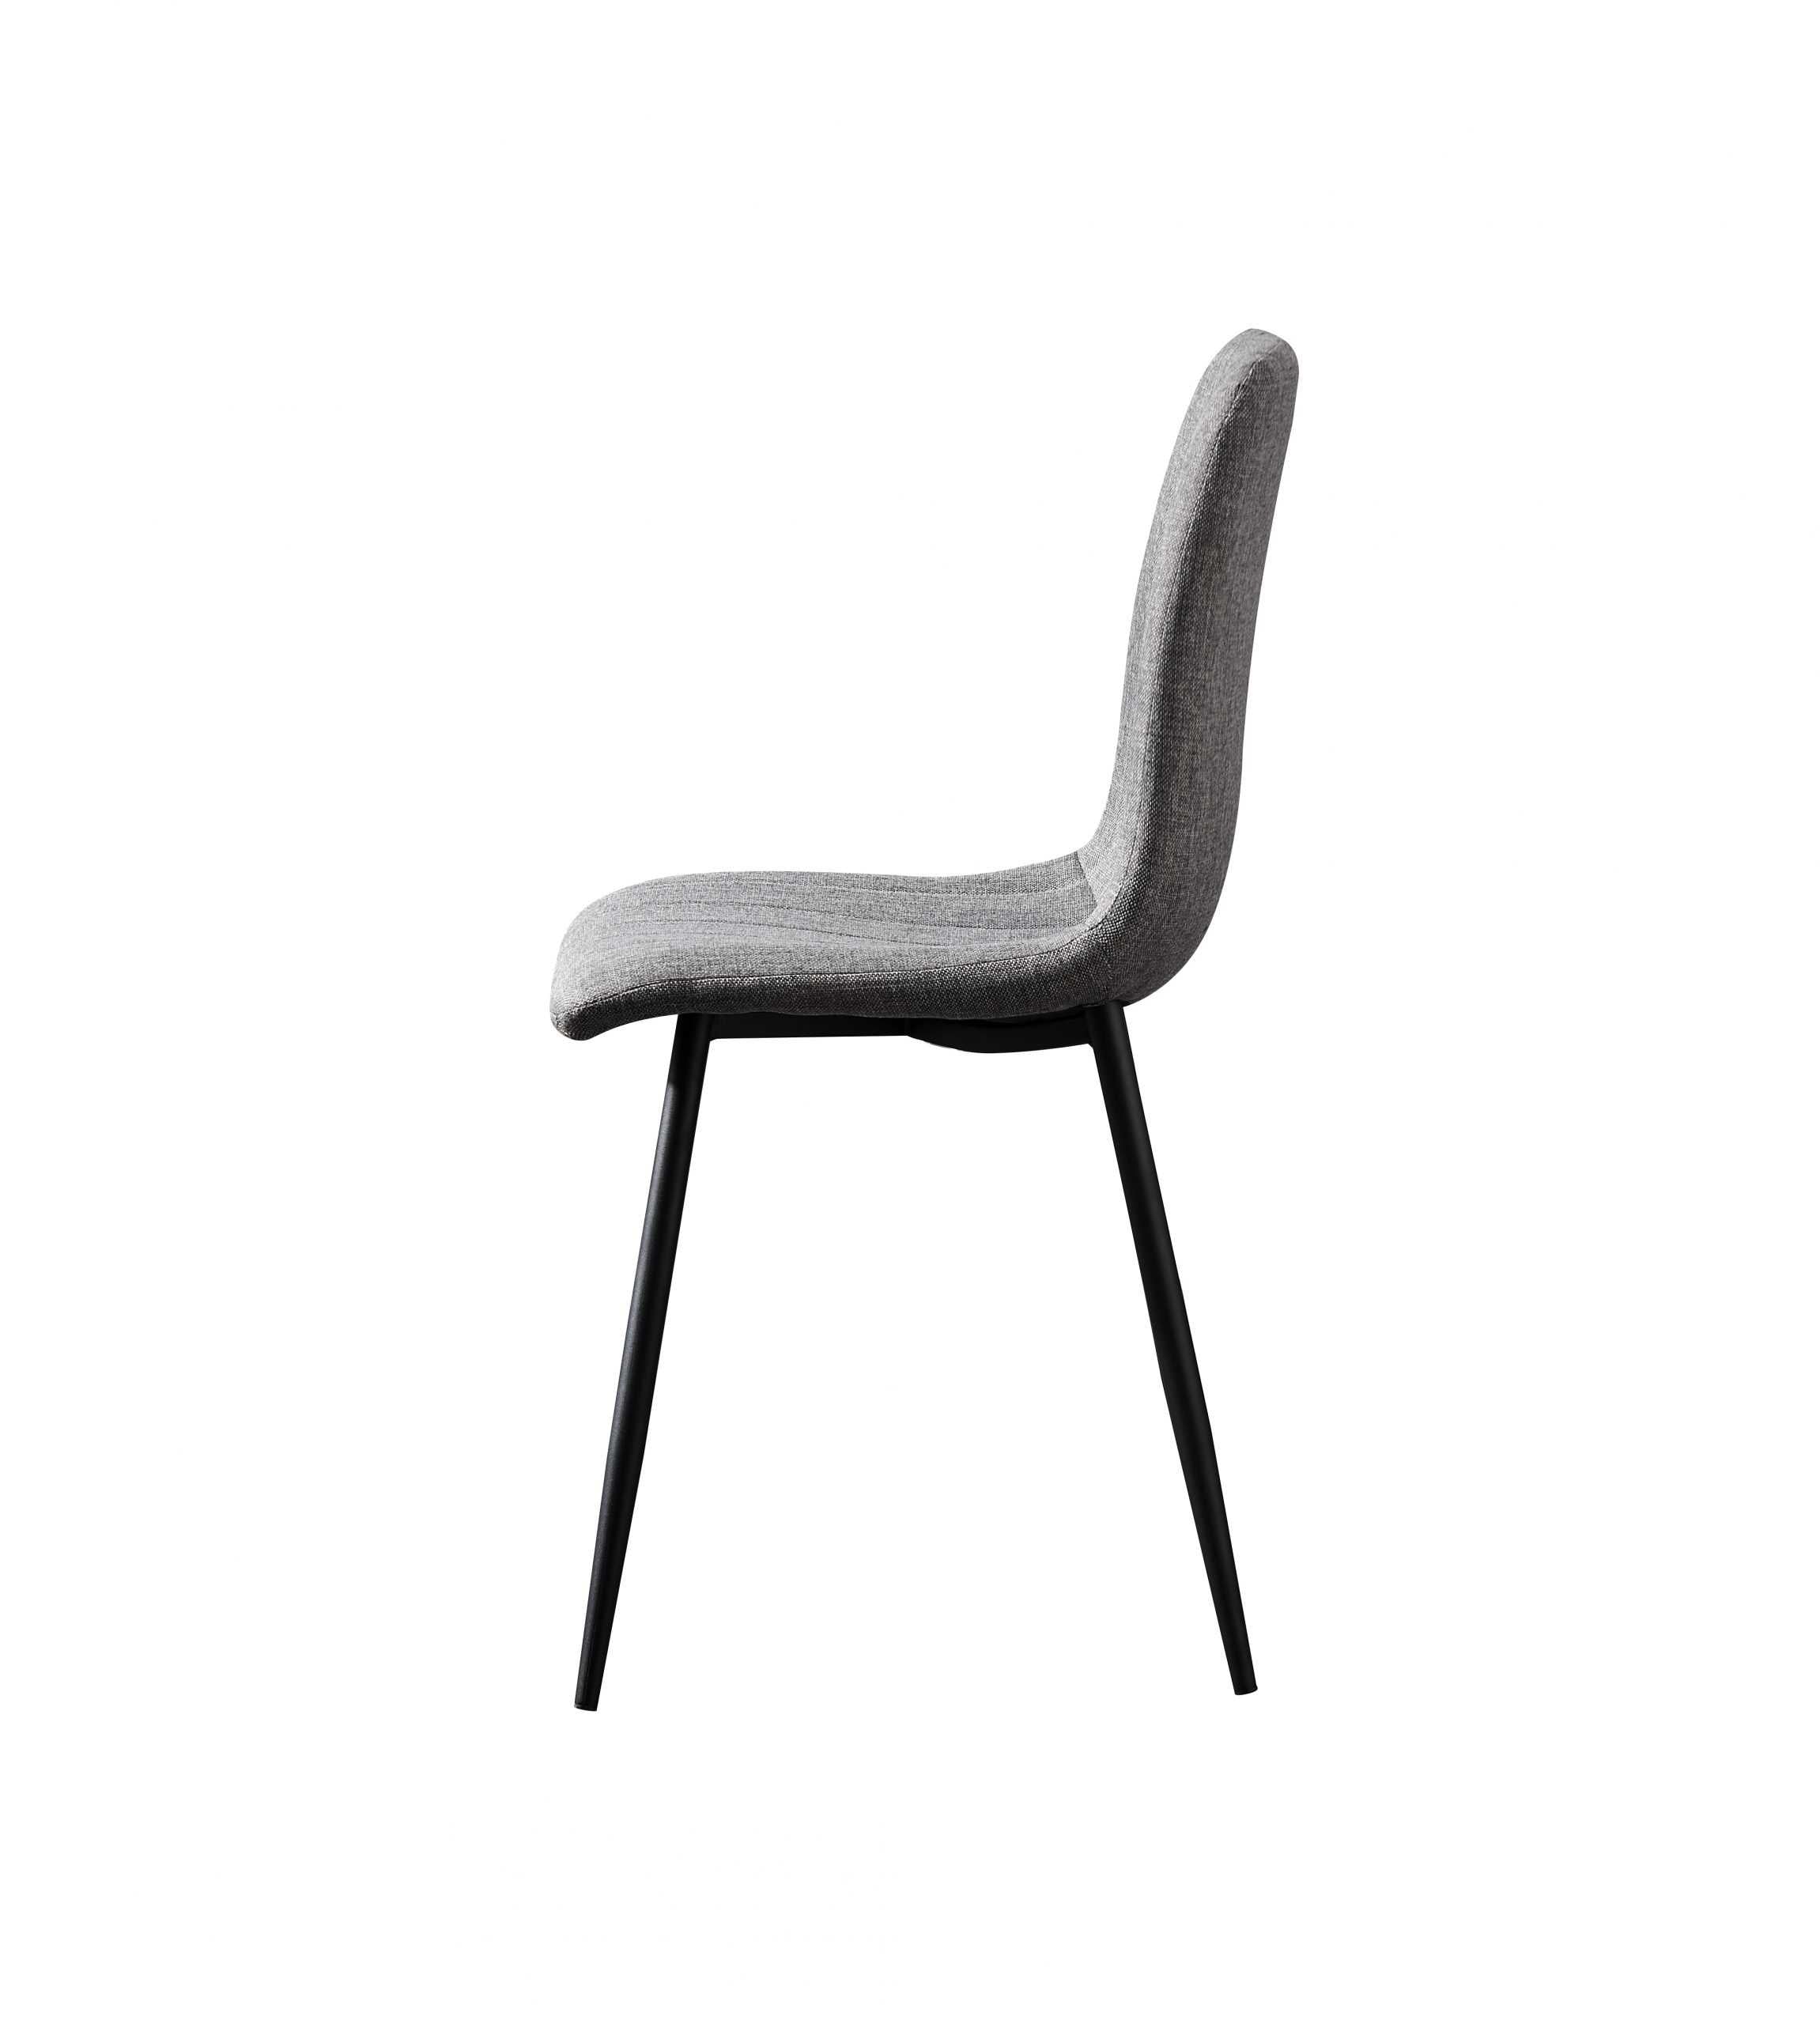 BT Theo Fabric Upholstered Dining Chair